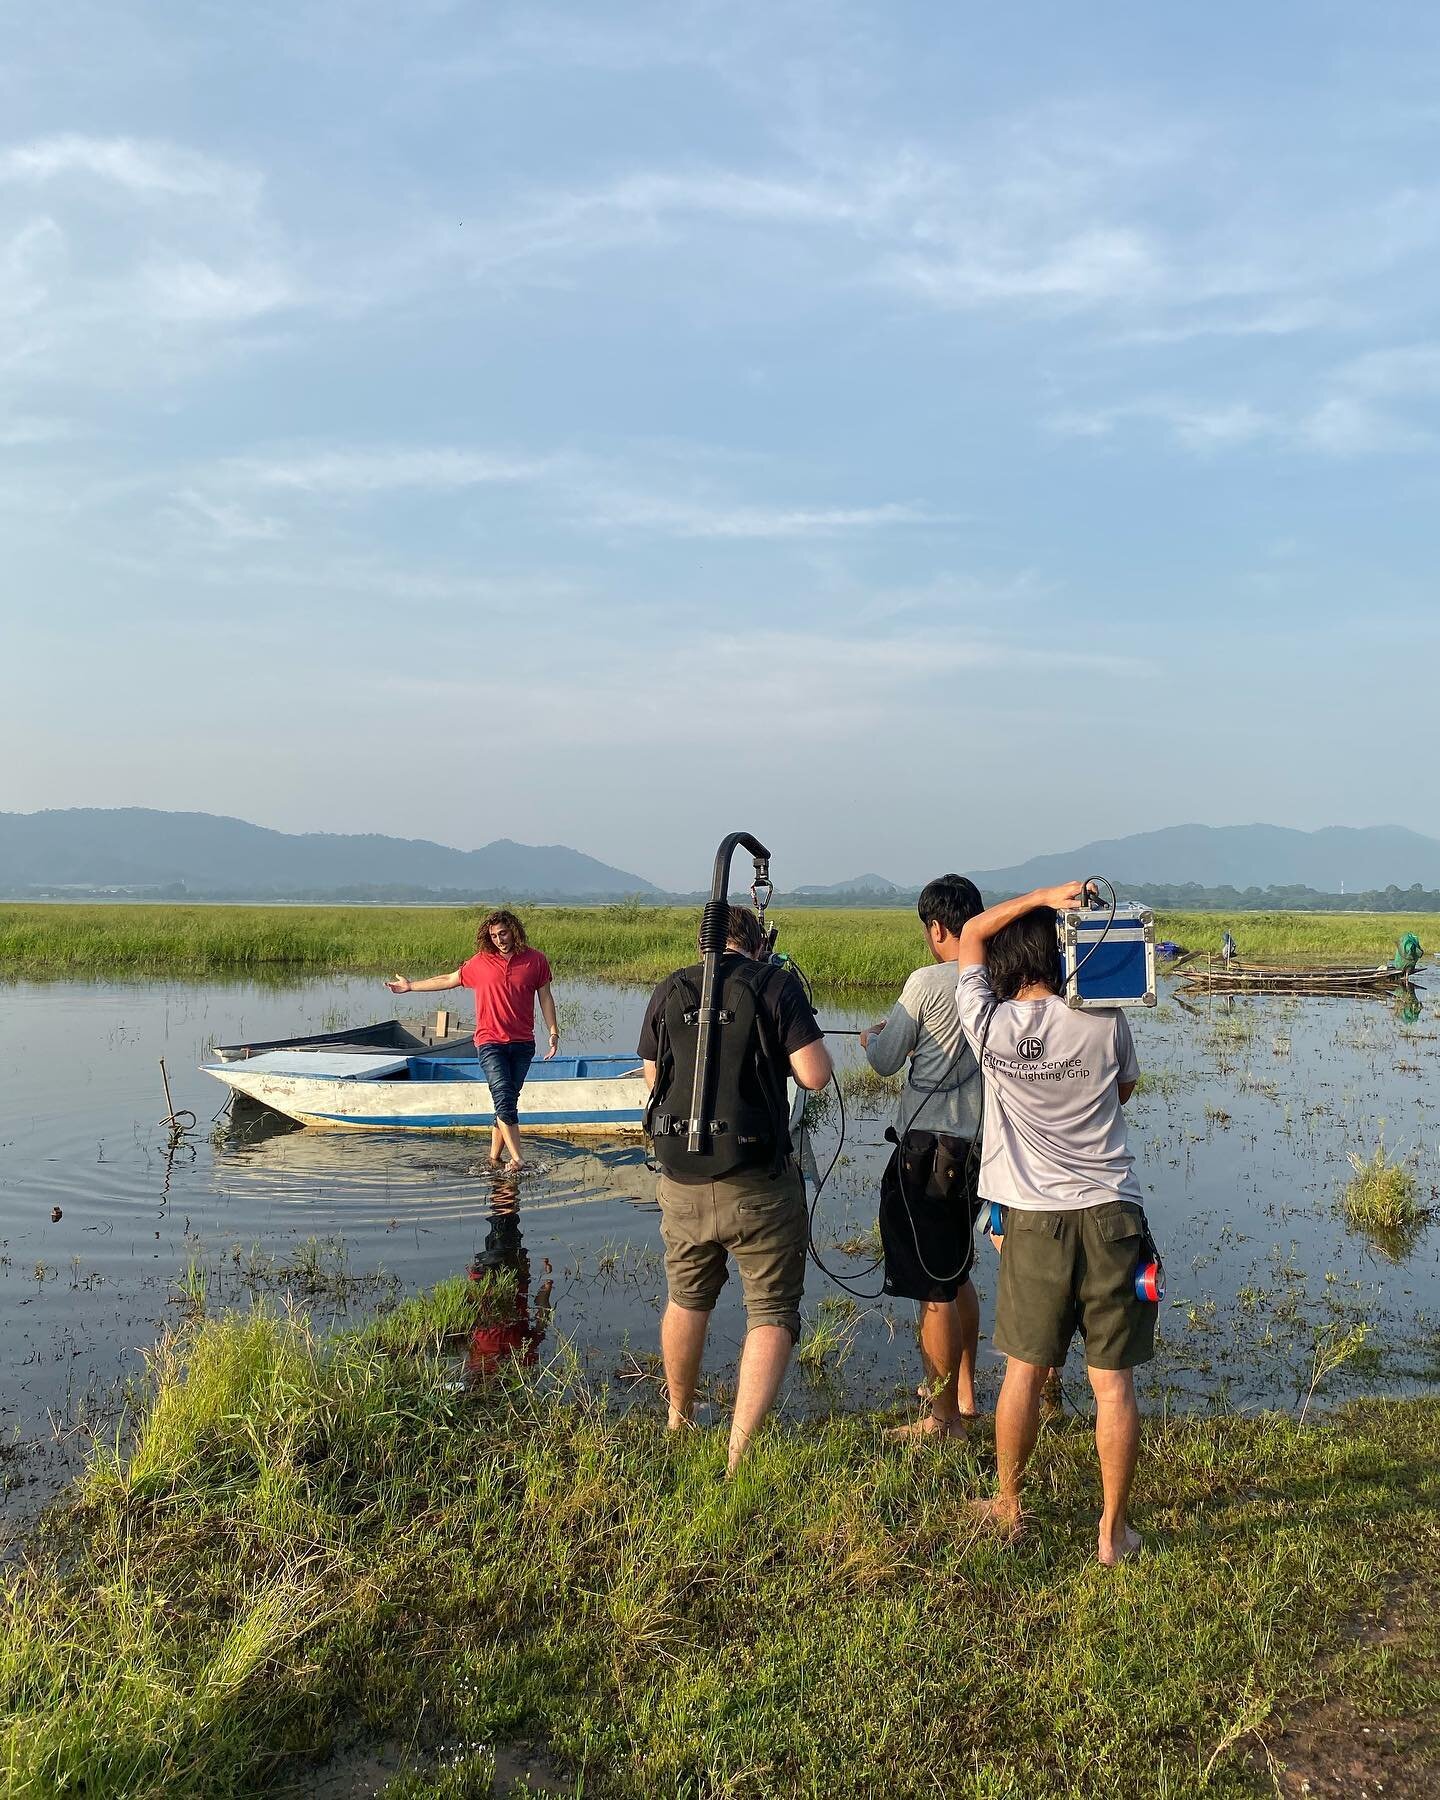 Shooting the Easy Going music video in Thailand was an unforgettable experience. the country is often referred to as &ldquo;the land of smiles&rdquo; which is partially what lead me to want to shoot the video there. i was super nervous at first going